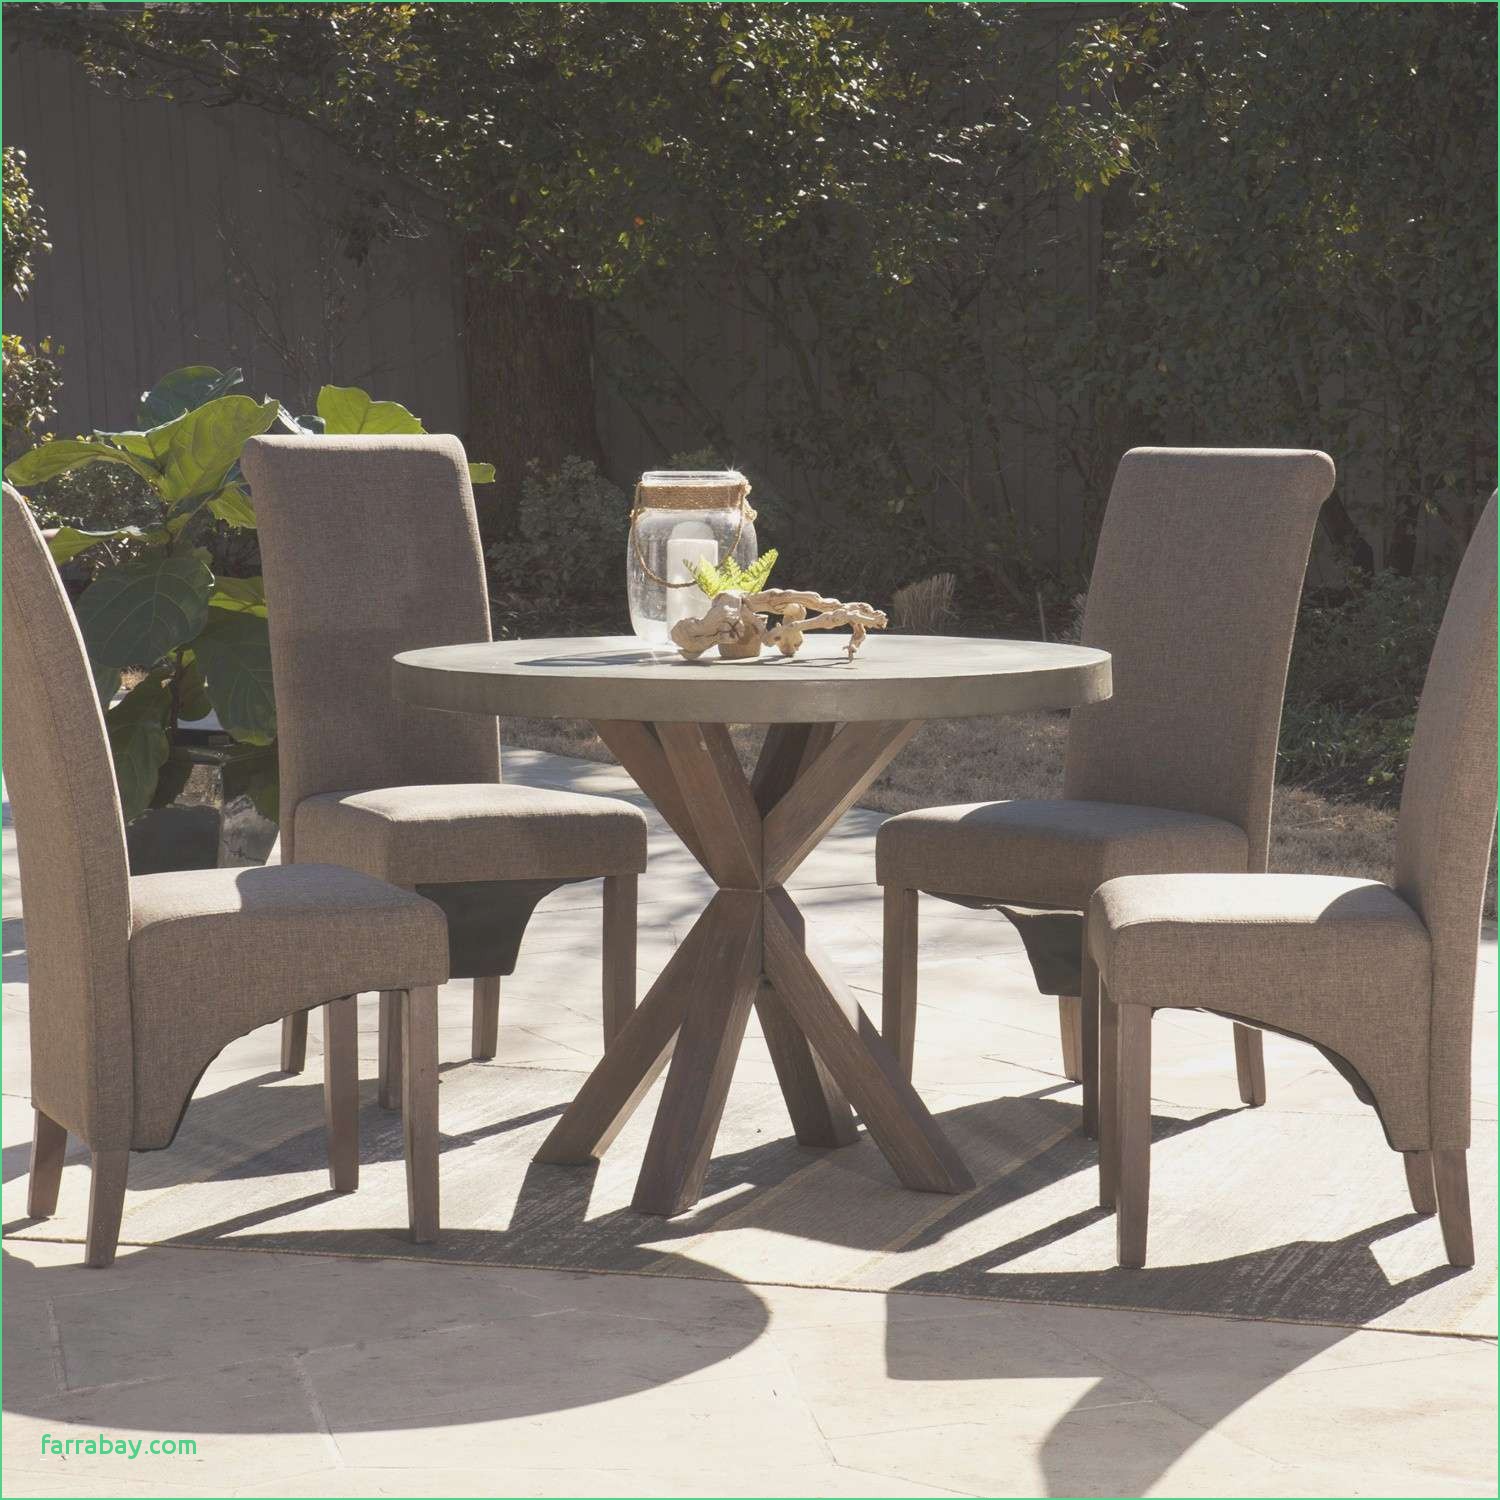 hesperide garden furniture luxury elegant outdoor table and chairs designsolutions usa of hesperide garden furniture